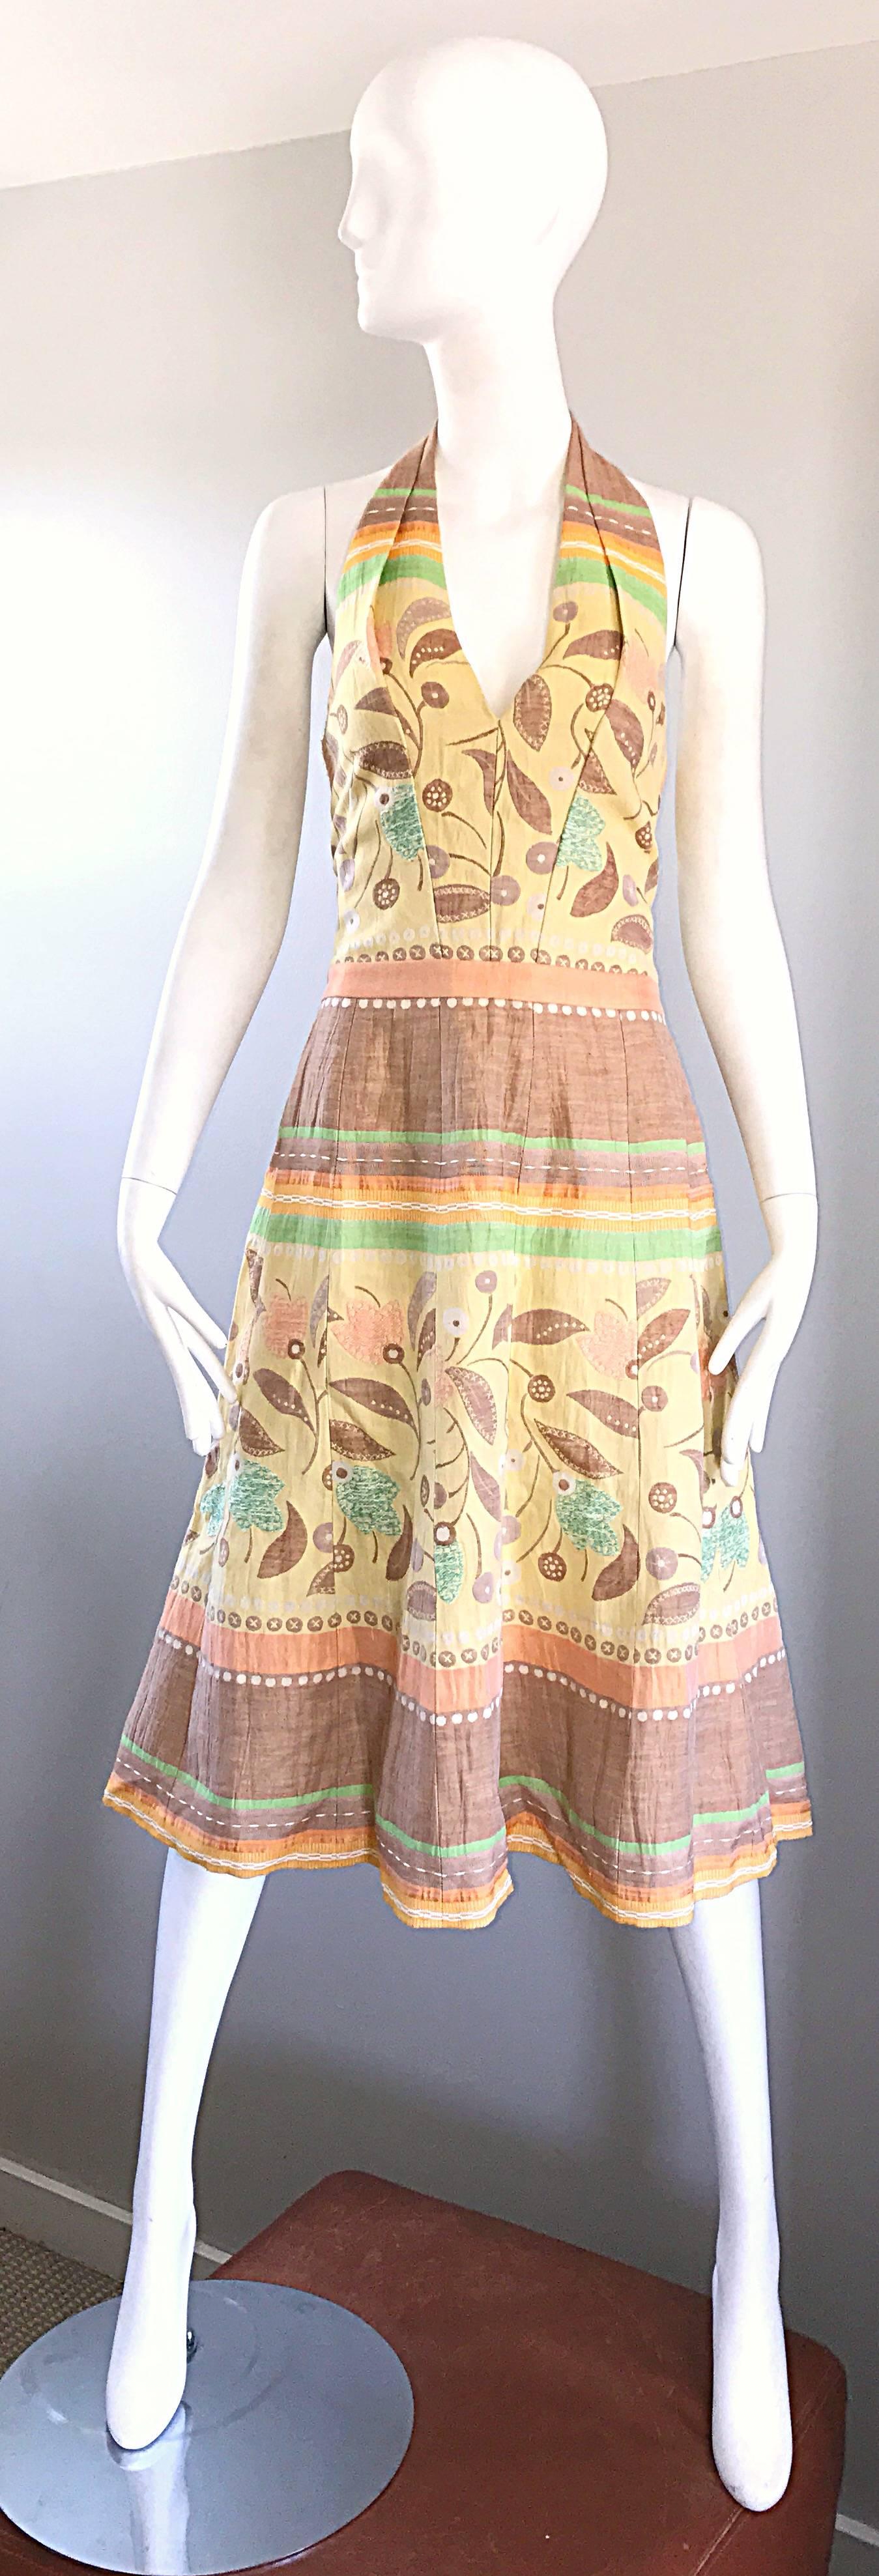 Chic LUCA LUCA halter dress! Soft cotton and linen blend. Embroidered flowers and leaves printed throughout. Beautiful pastel colors in yellow, green, orange and brown throughout. Fully lined in silk. Hidden zipper up the back with hook-and-eye